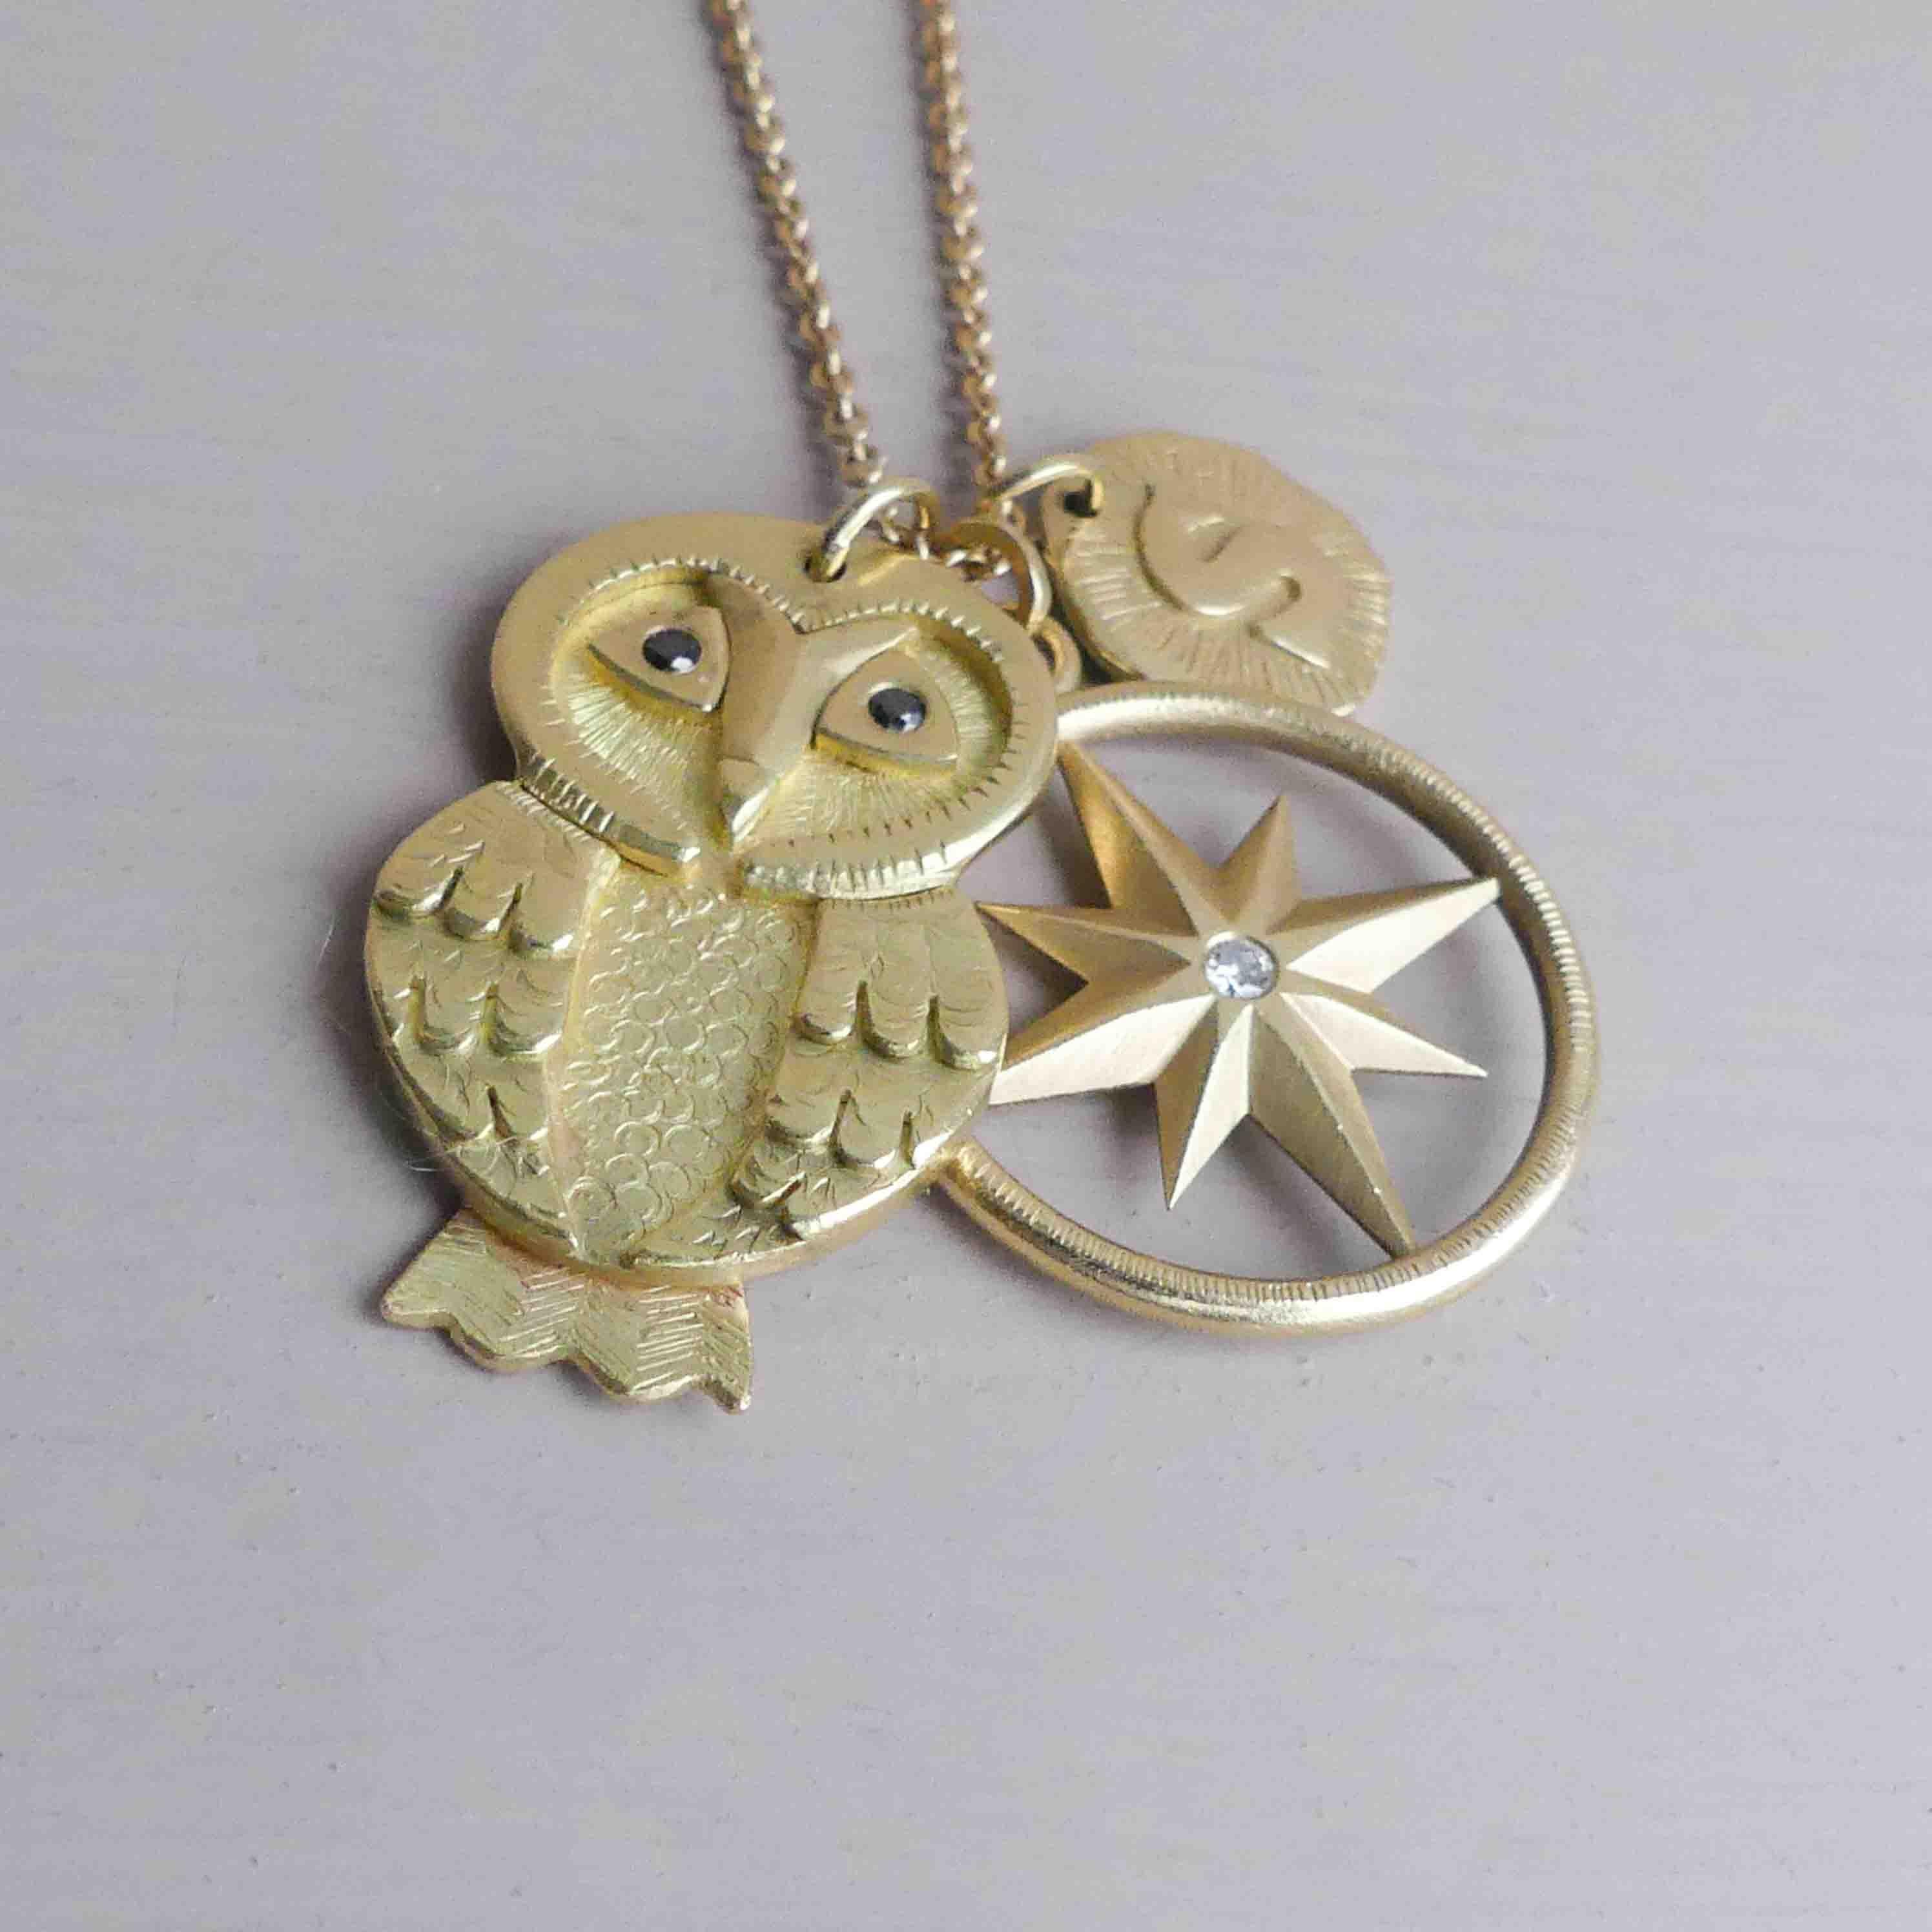 The Minerva Owl Amulet - an ethically handcrafted gold owl pendant handmade using 18ct Fairtrade gold and accented with two black diamonds eyes.

Owls are the shamans of the bird world and have appeared in myths and folklore worldwide for centuries.